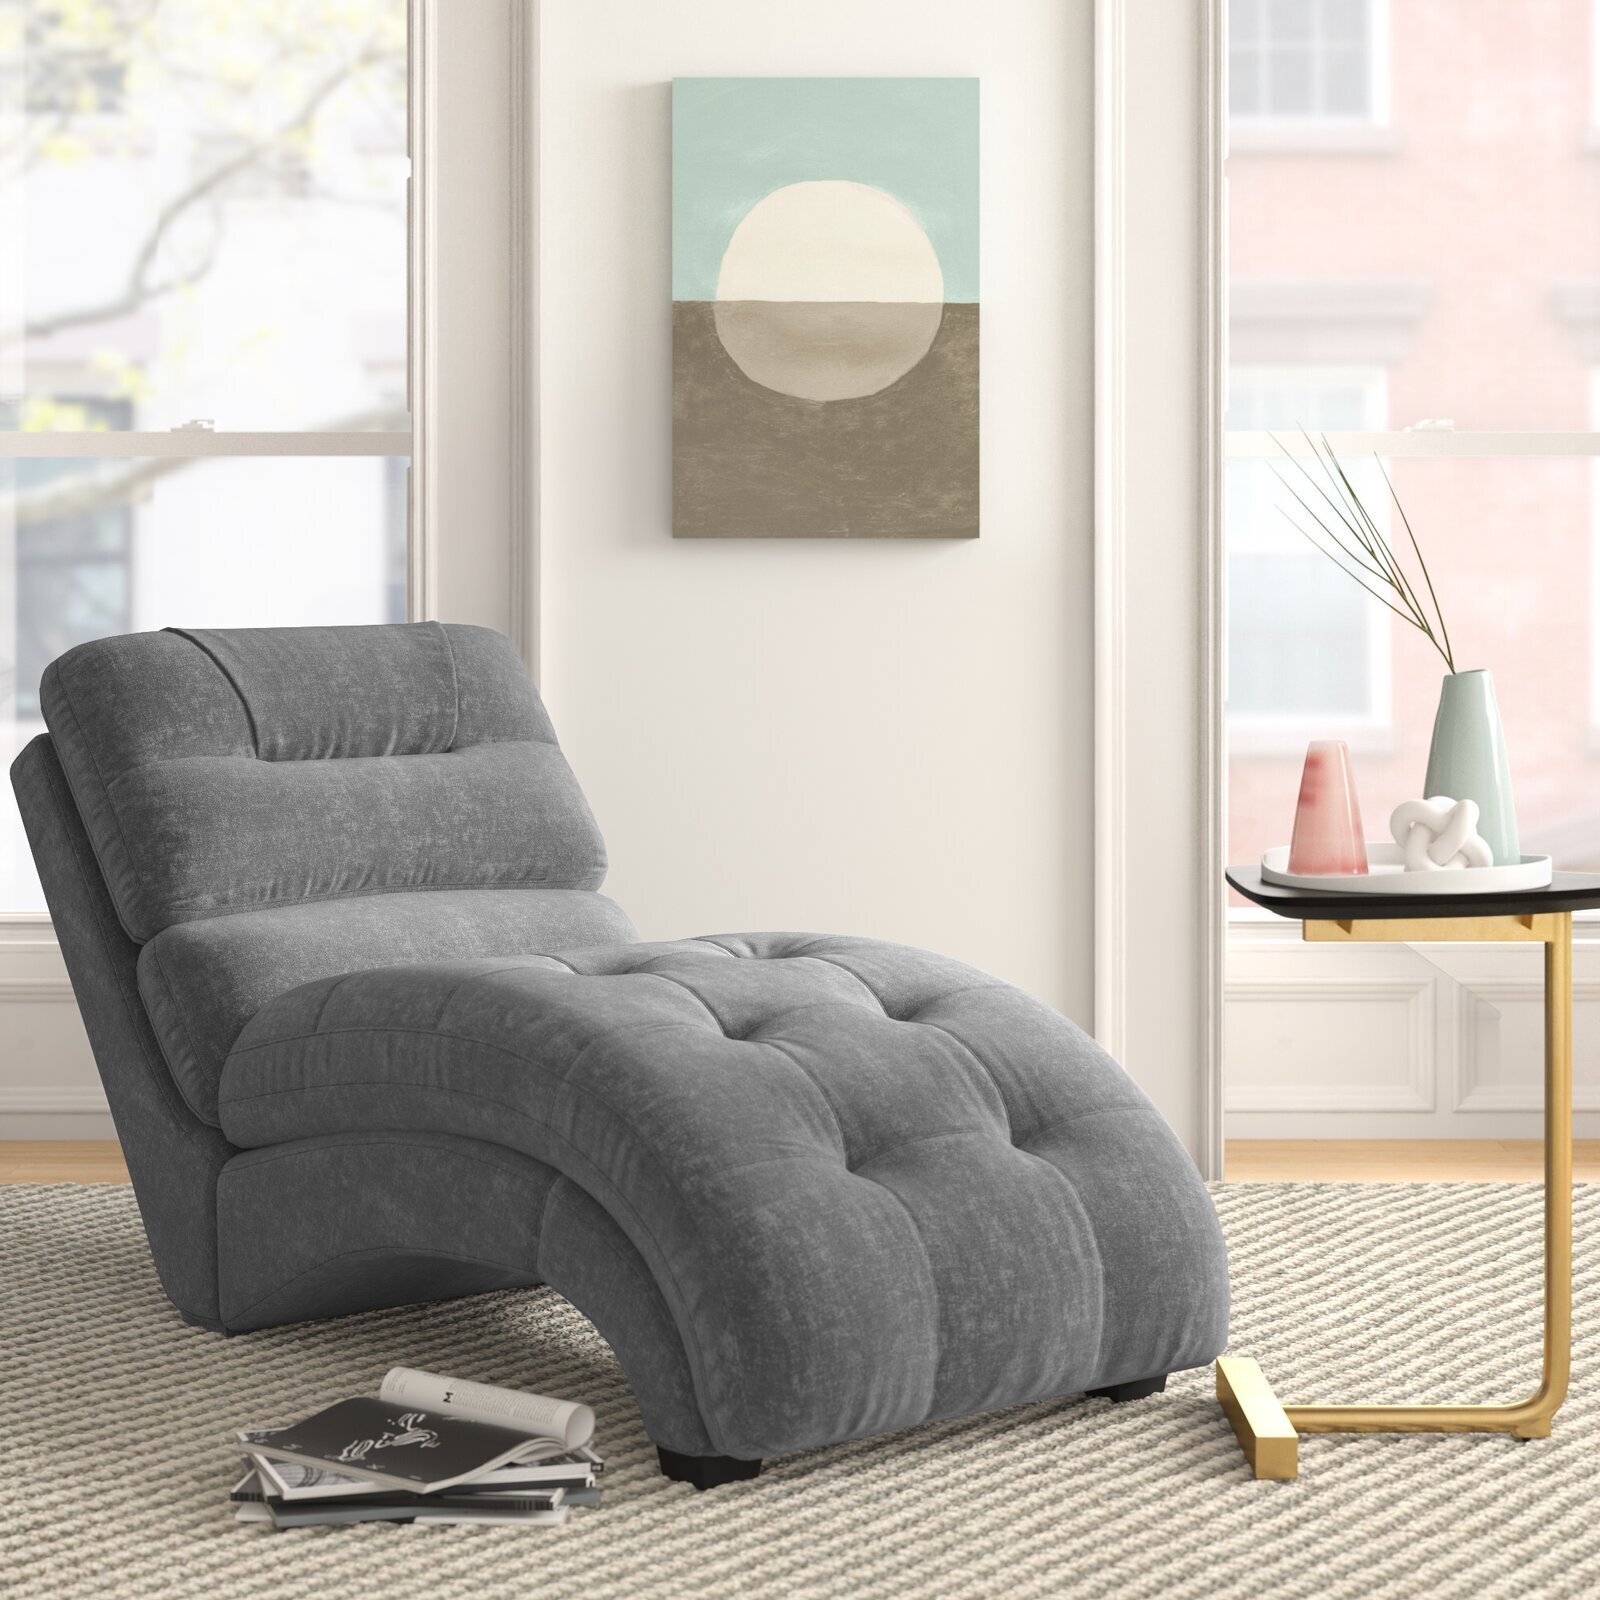 Comfy Tufted Modern Chaise Longue